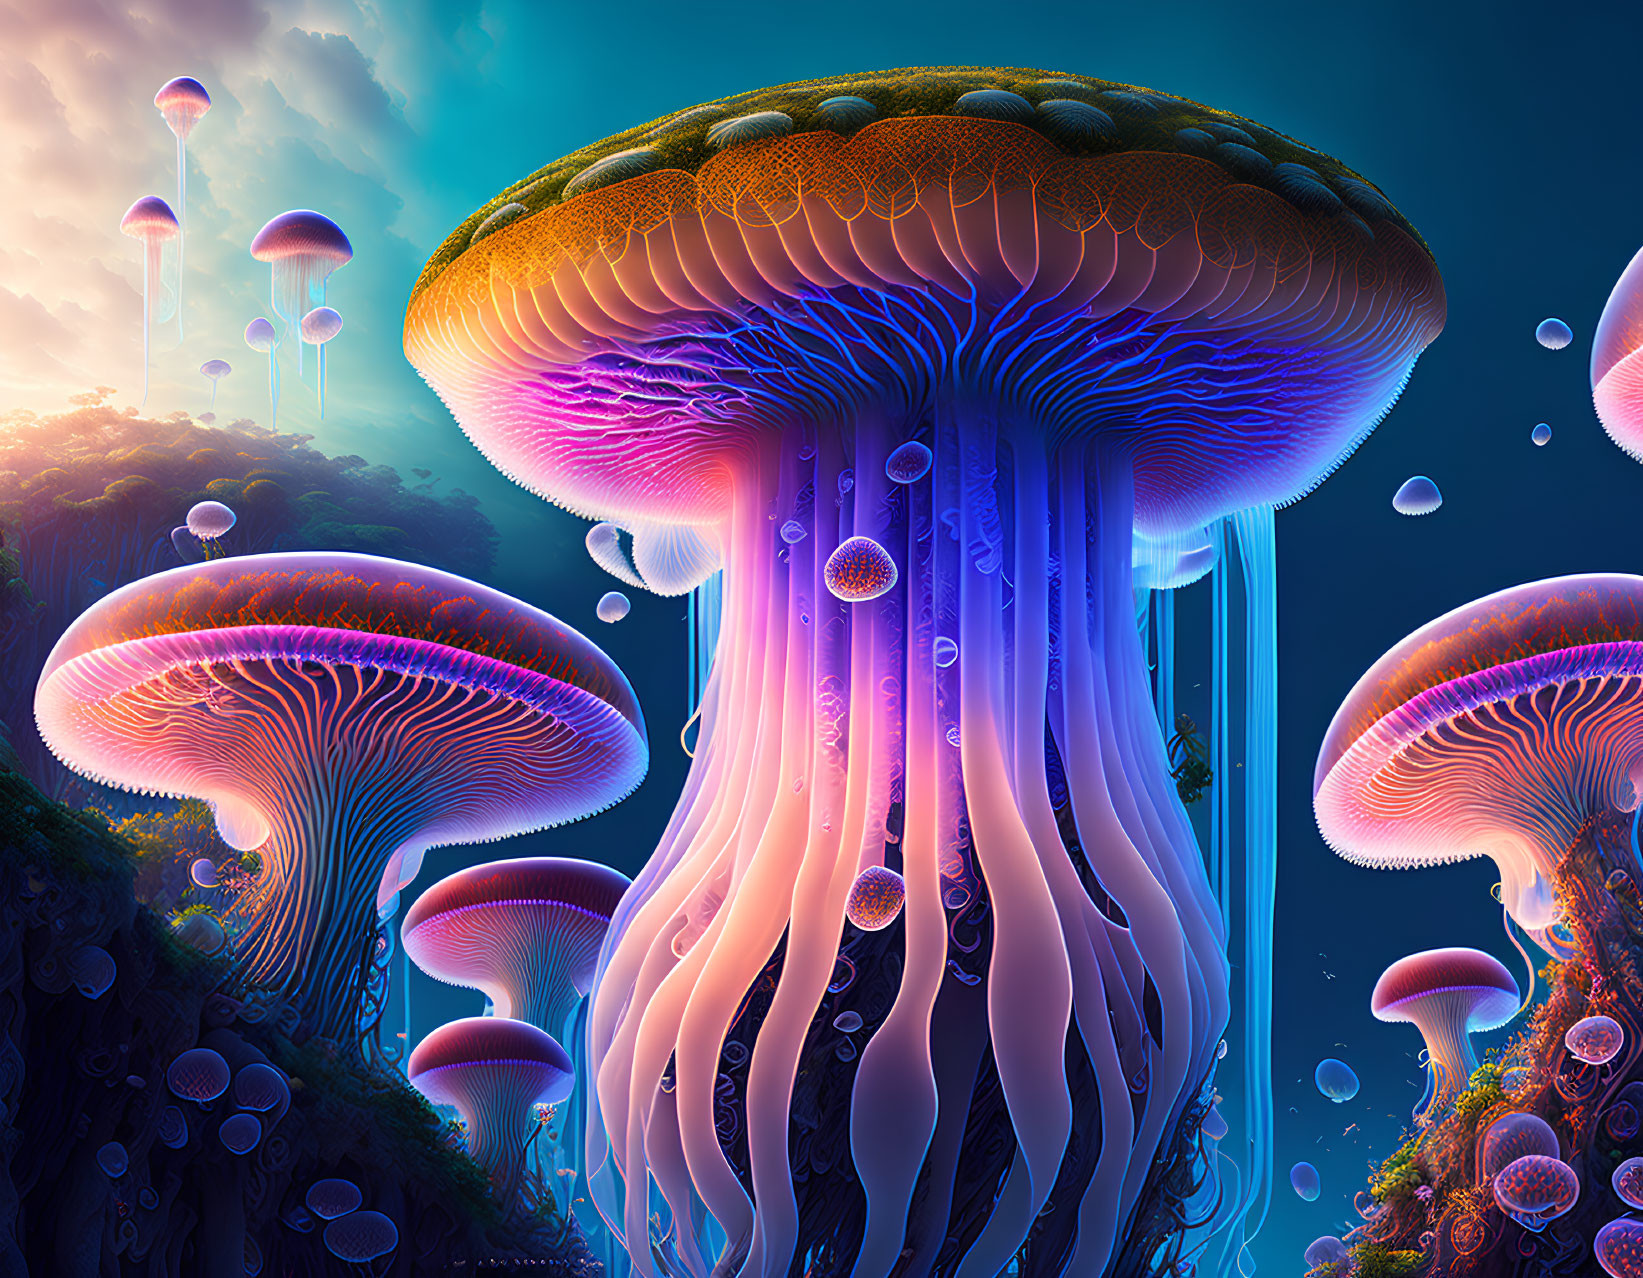 Bioluminescent jellyfish in twilight sky with mushroom structures